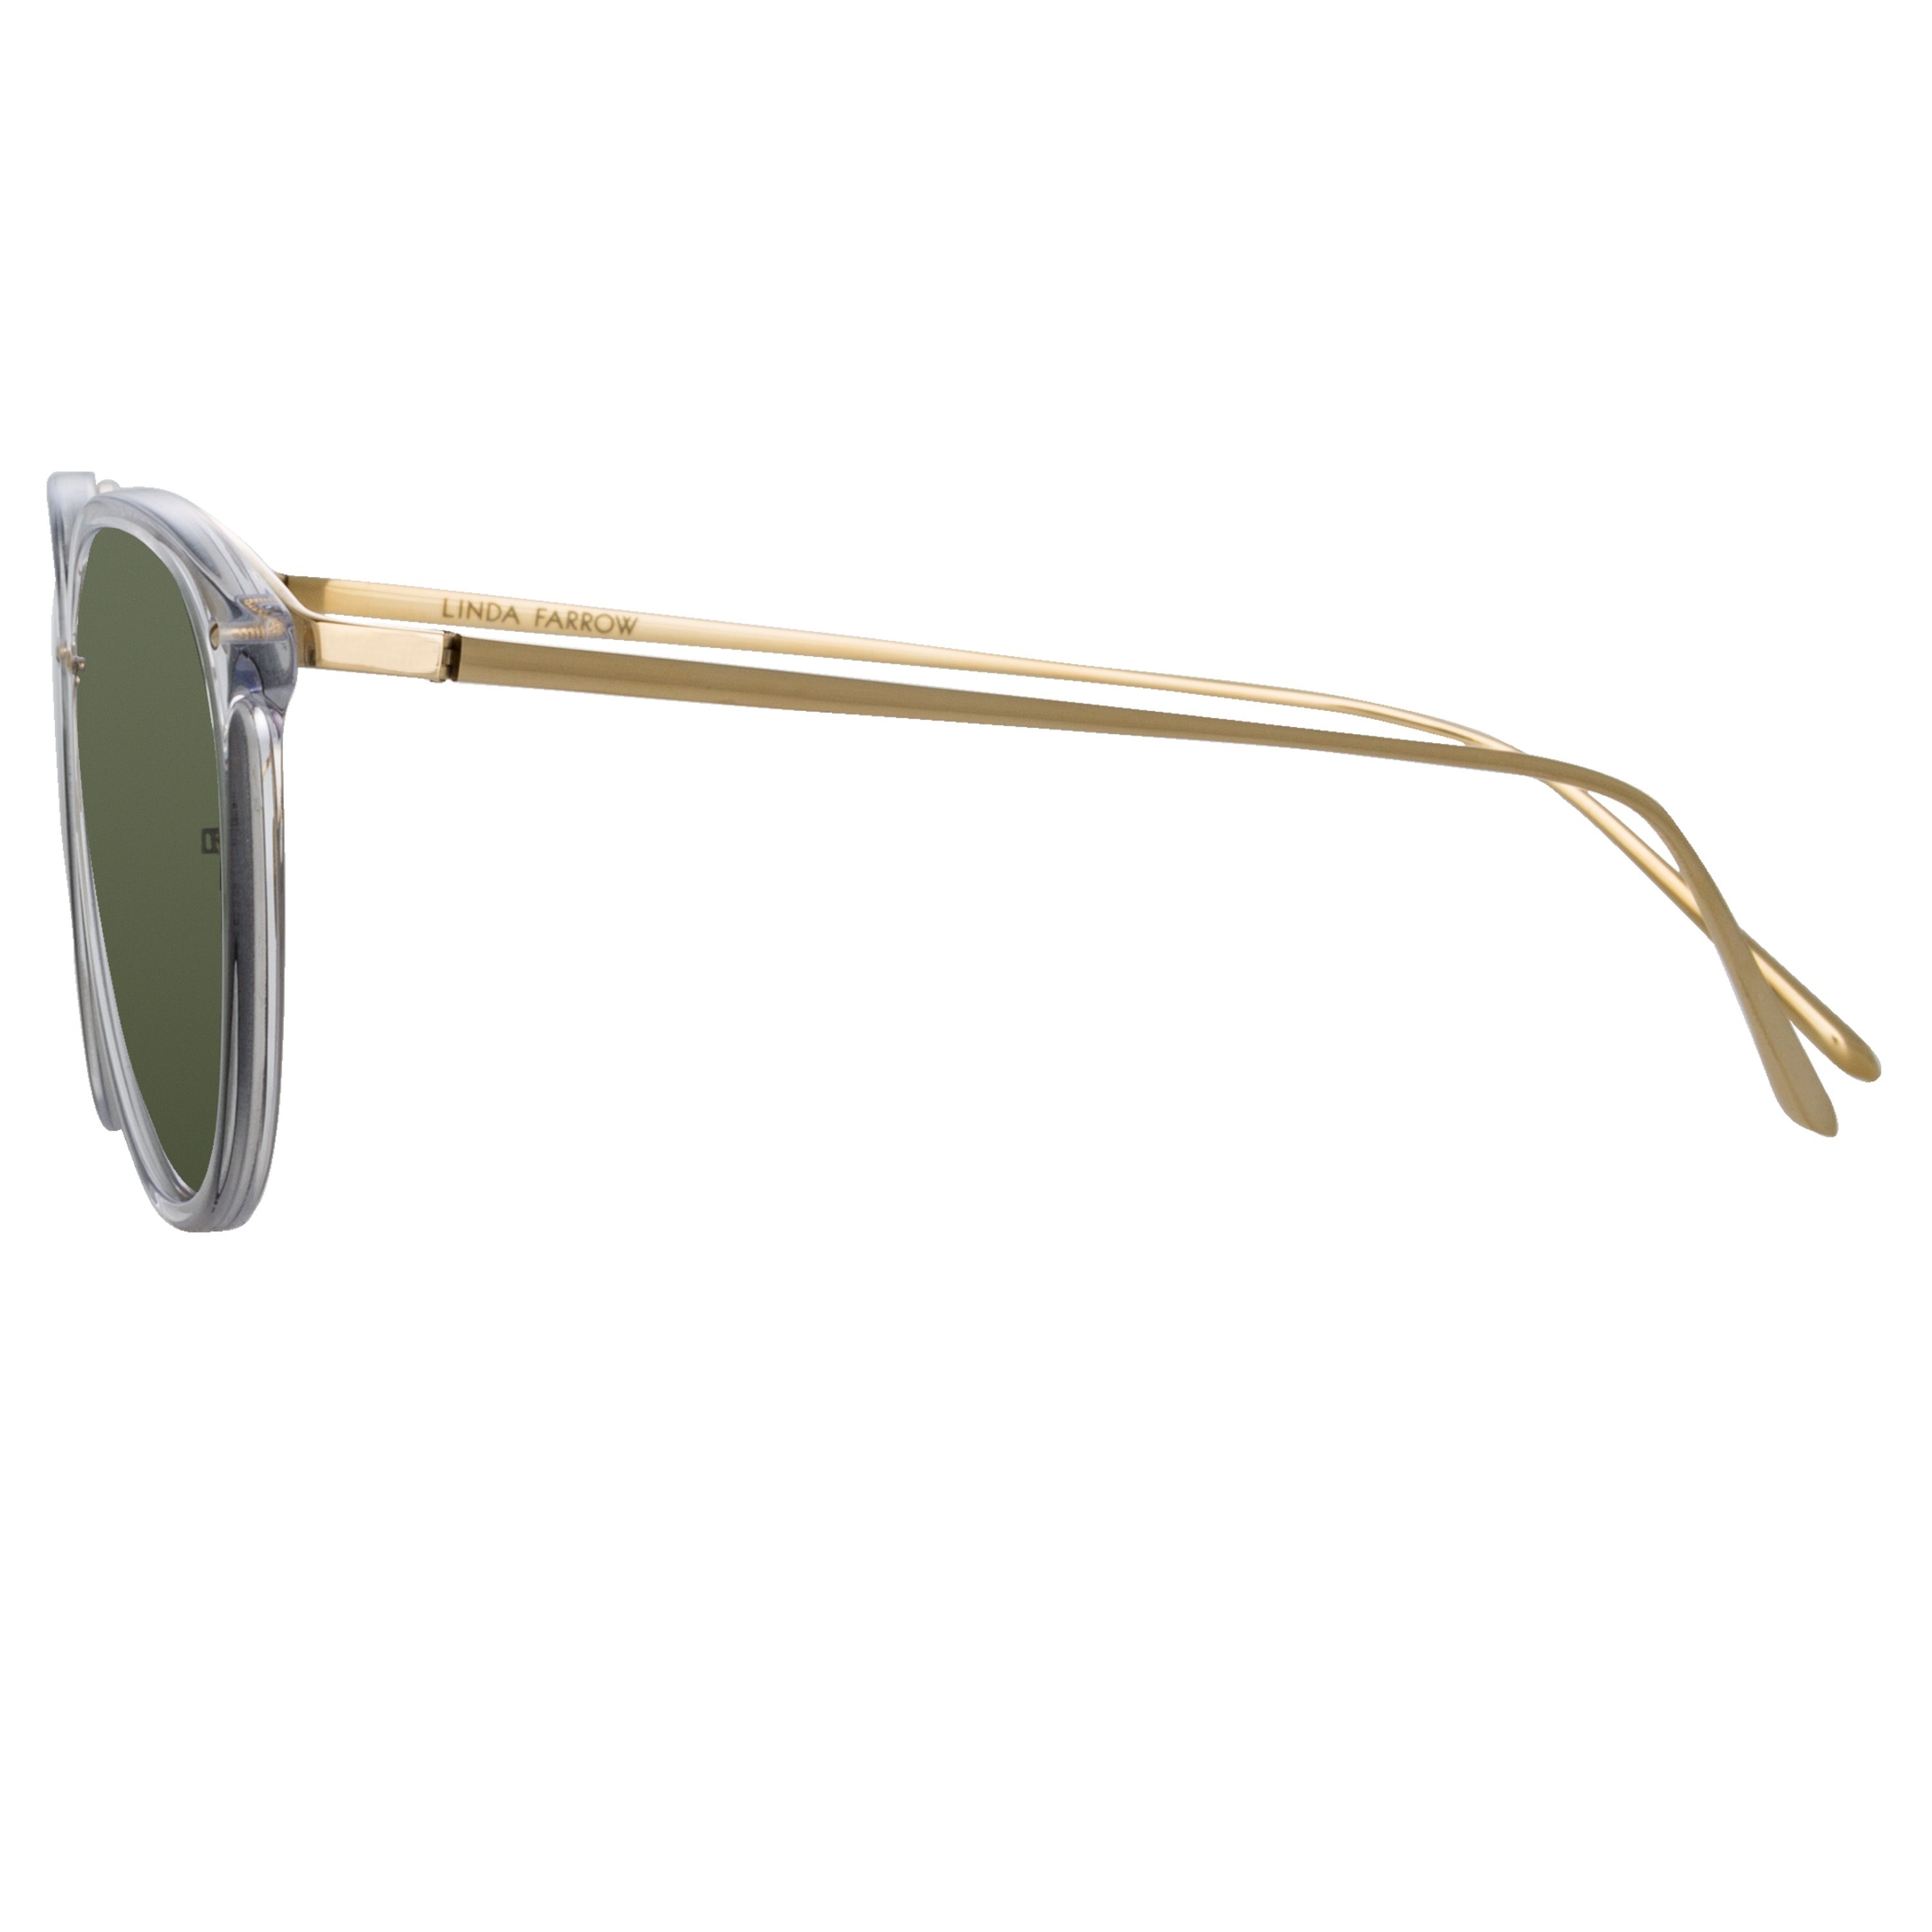 THE CALTHORPE |  OVAL SUNGLASSES IN CLEAR FRAME(C76) - 2